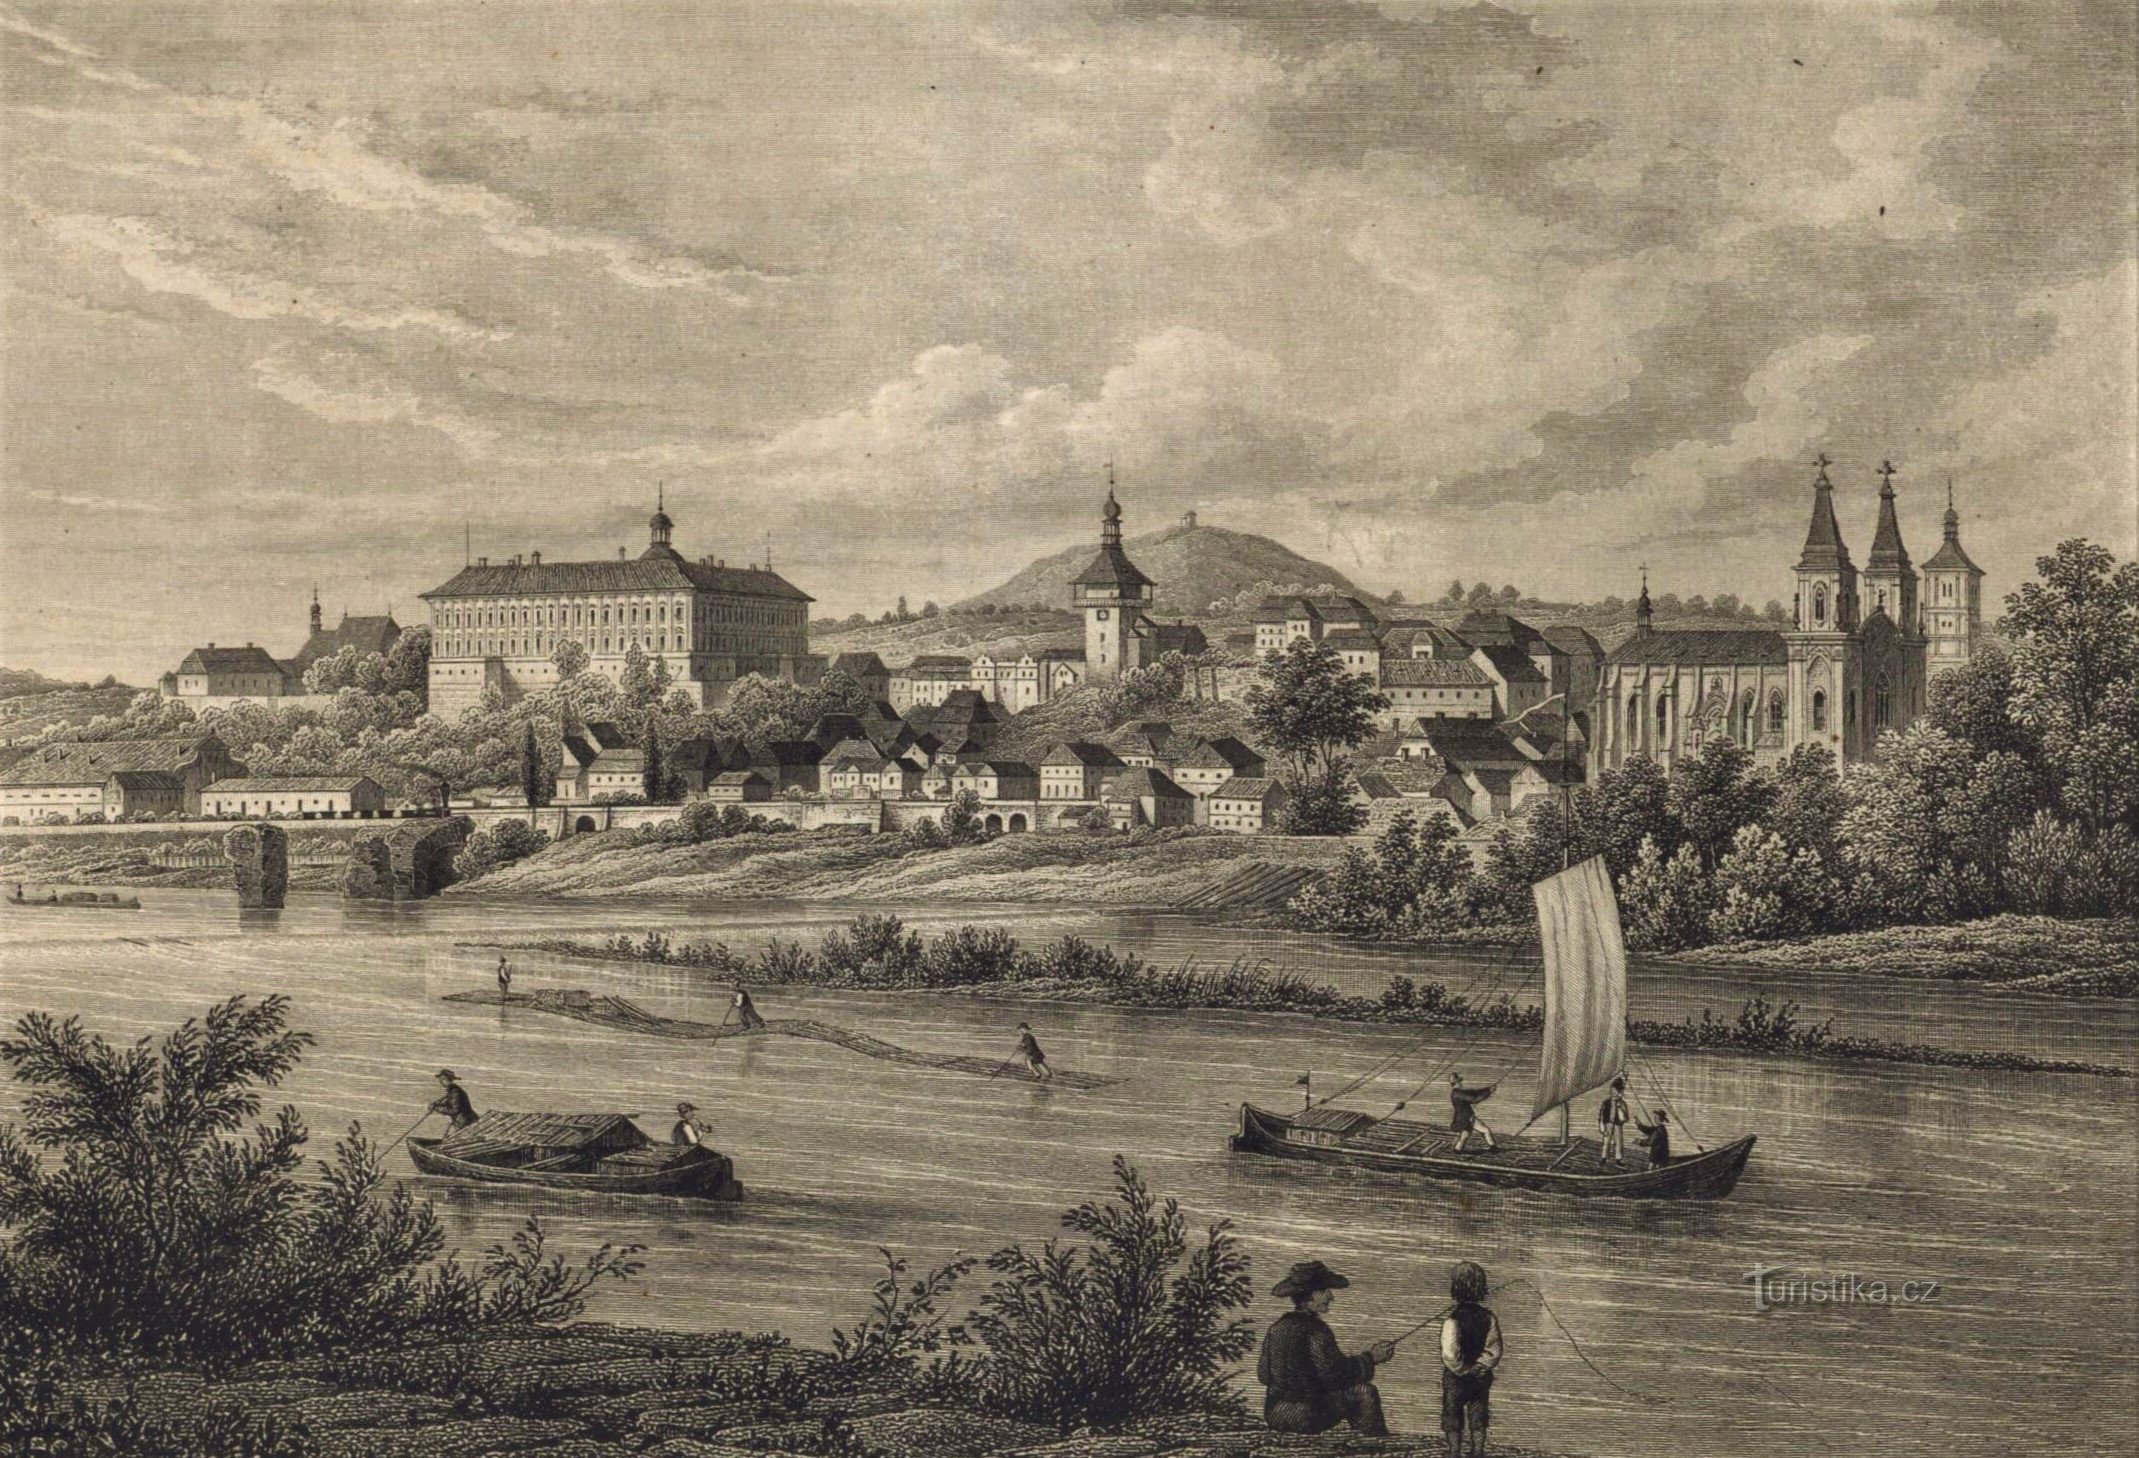 View of Roudnice nad Labem after 1850 (the brewery is located under the castle on the far left)